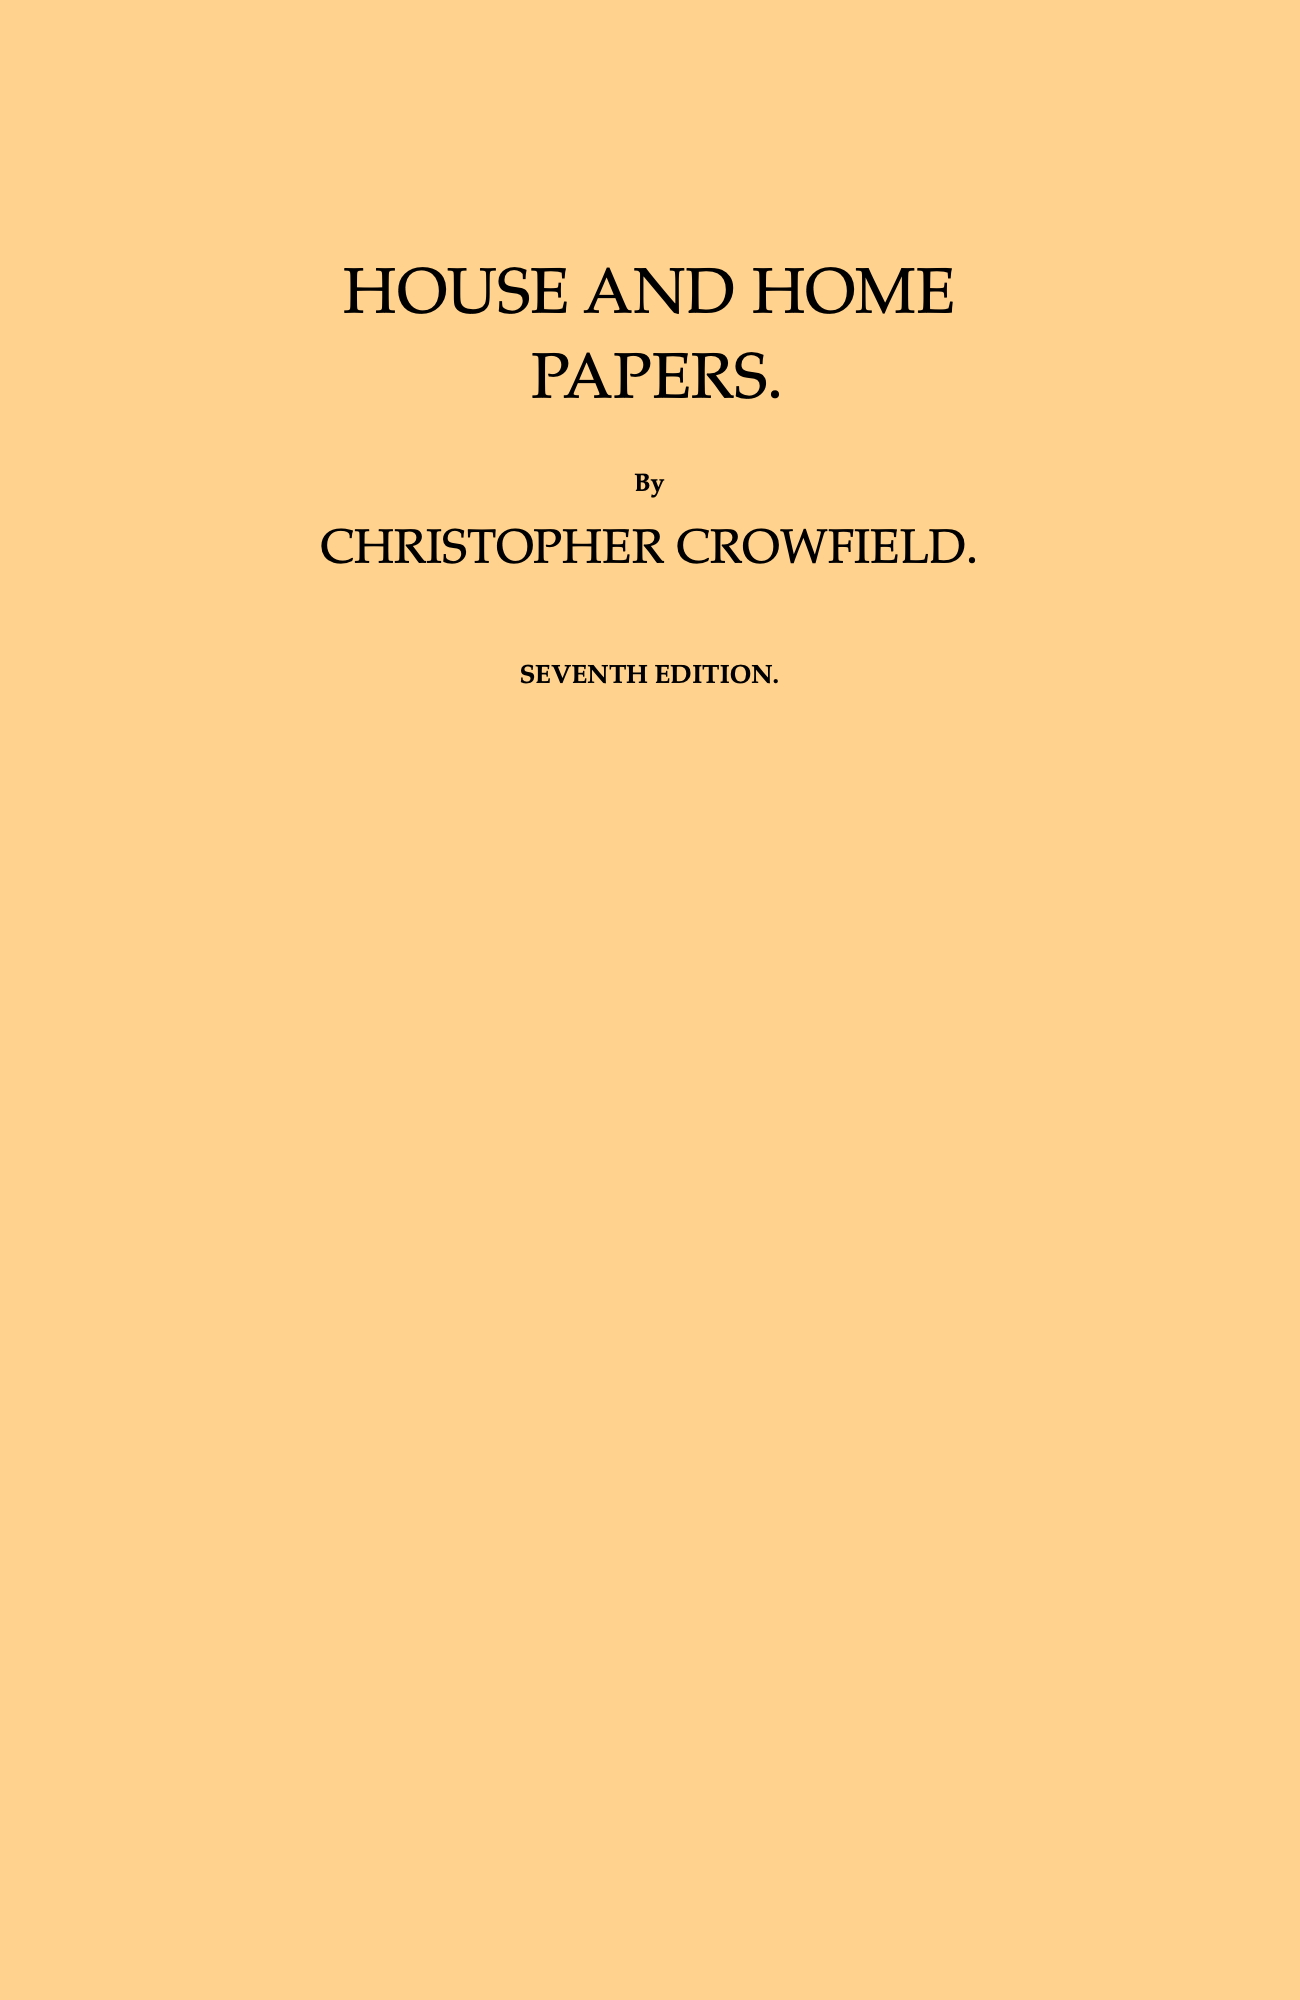 House and Home Papers, by Christopher Crowfield--A Project Gutenberg eBook